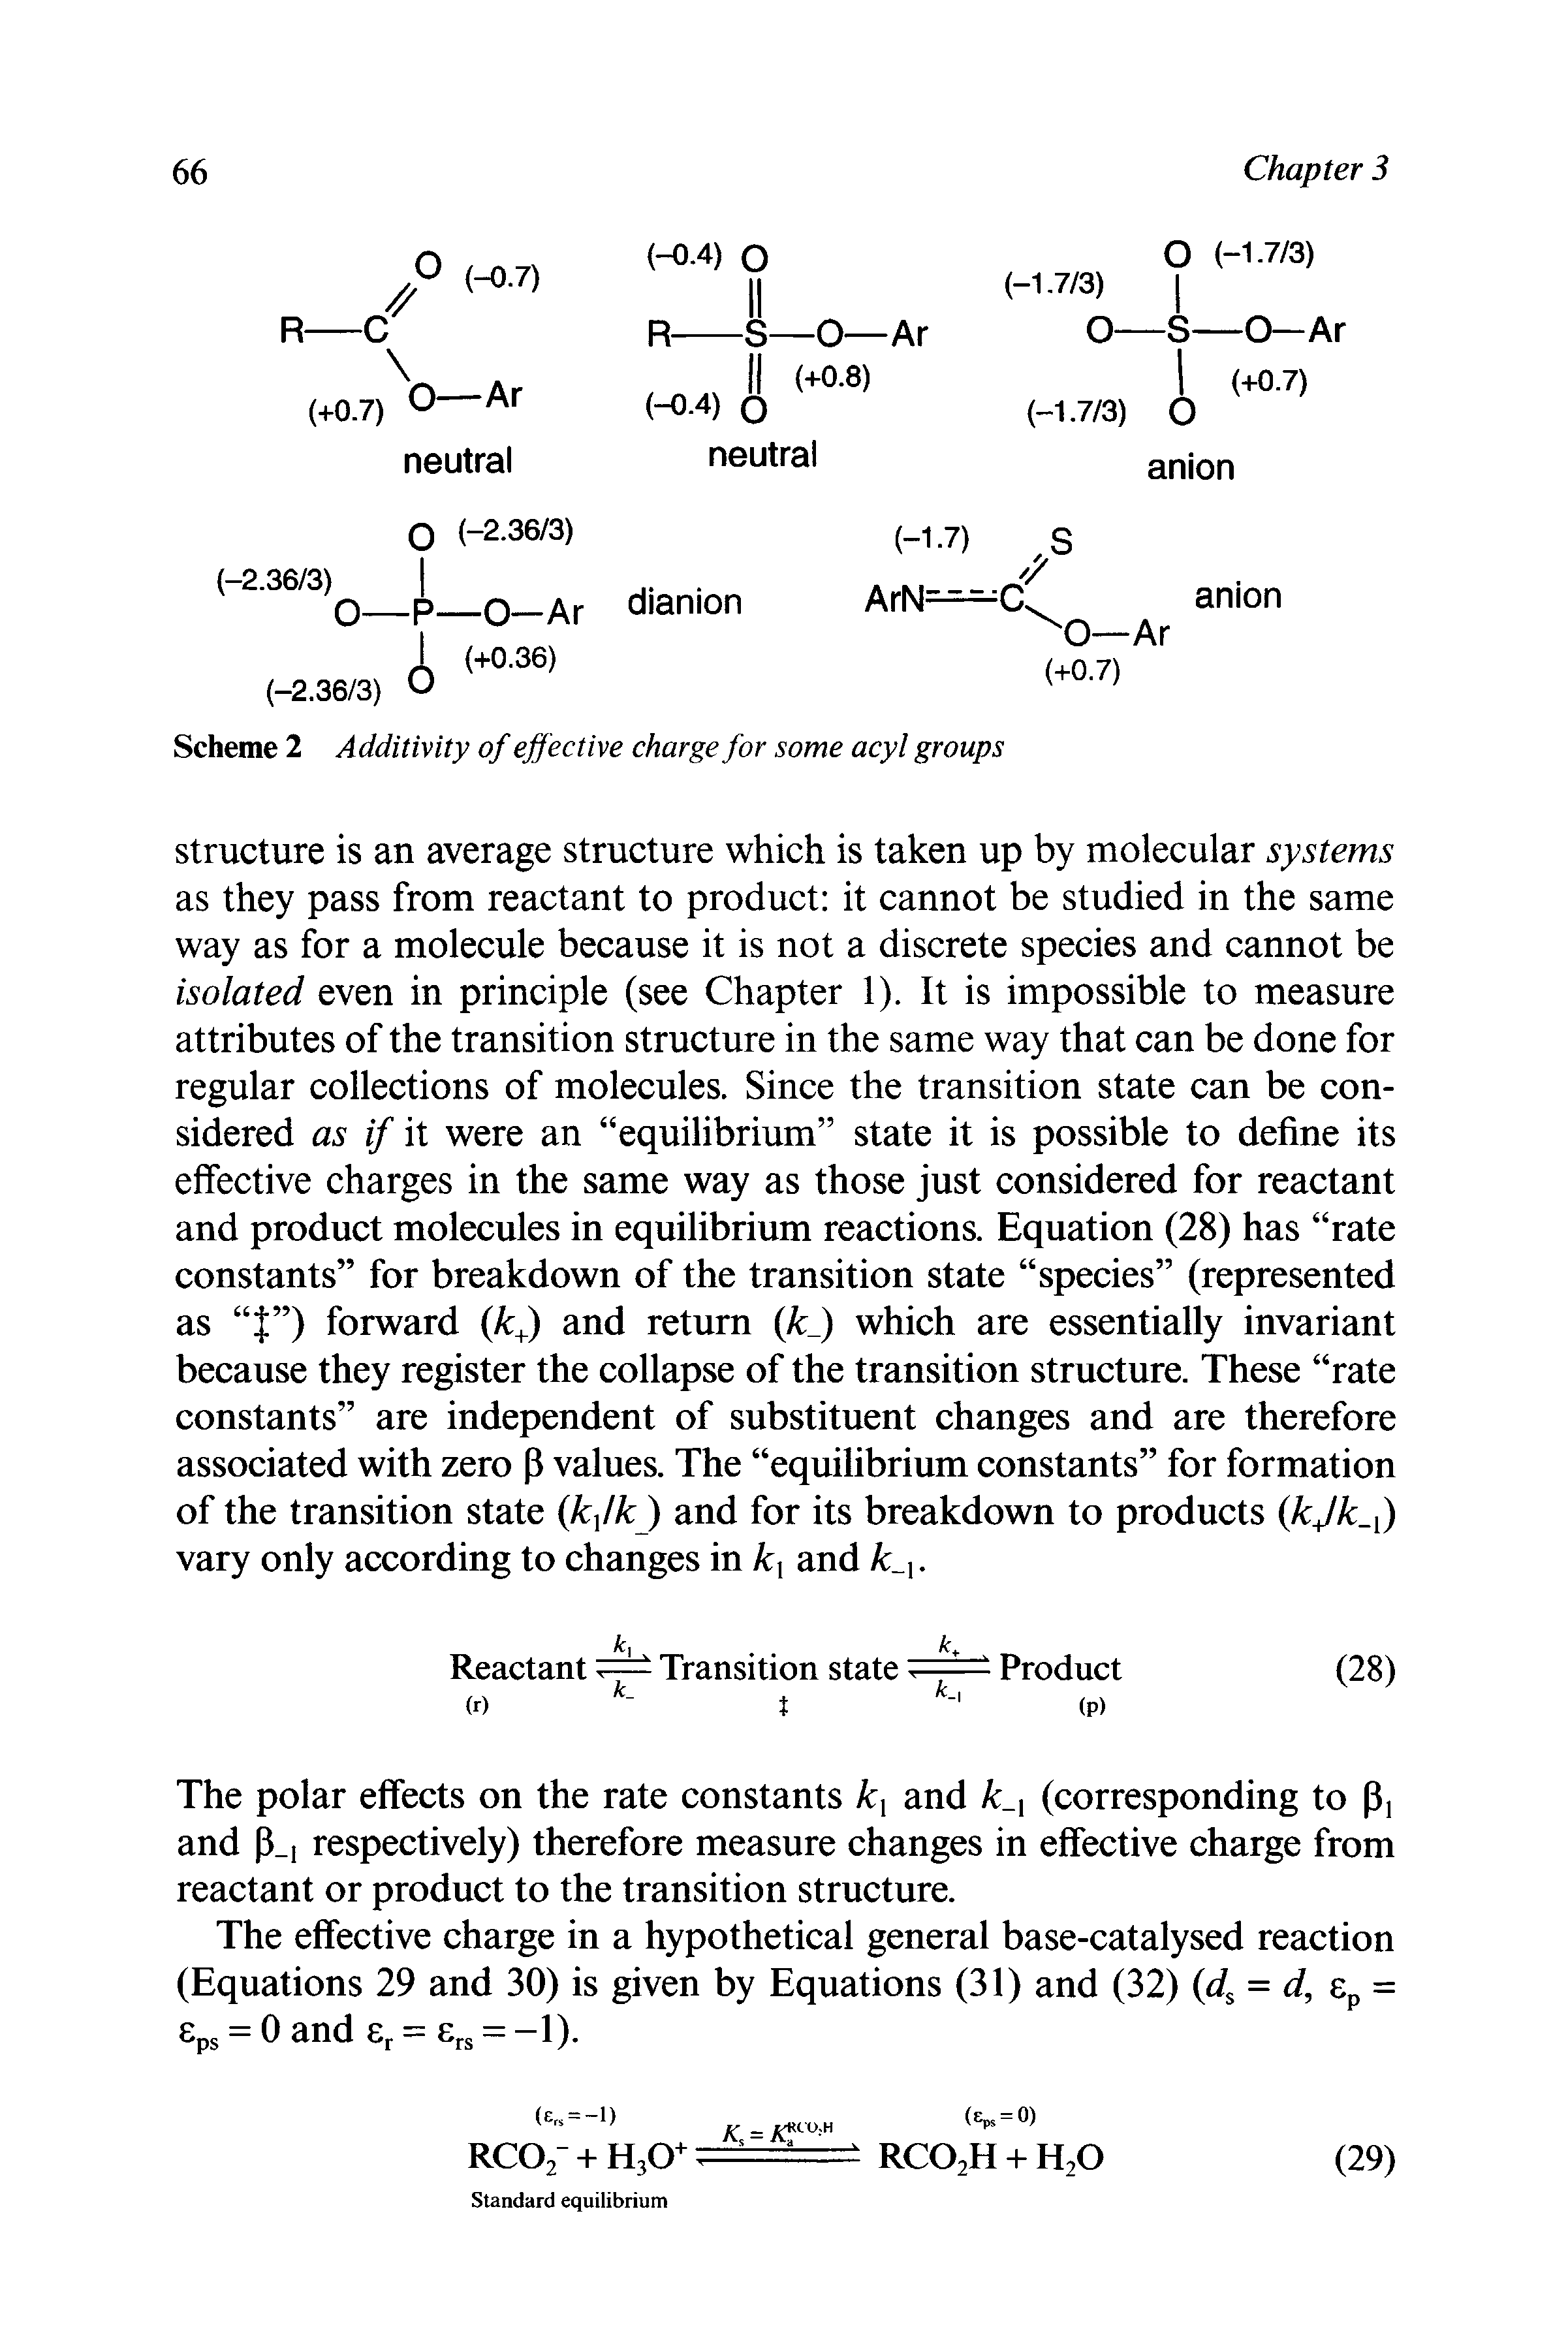 Scheme 2 Additivity of effective charge for some acyl groups...